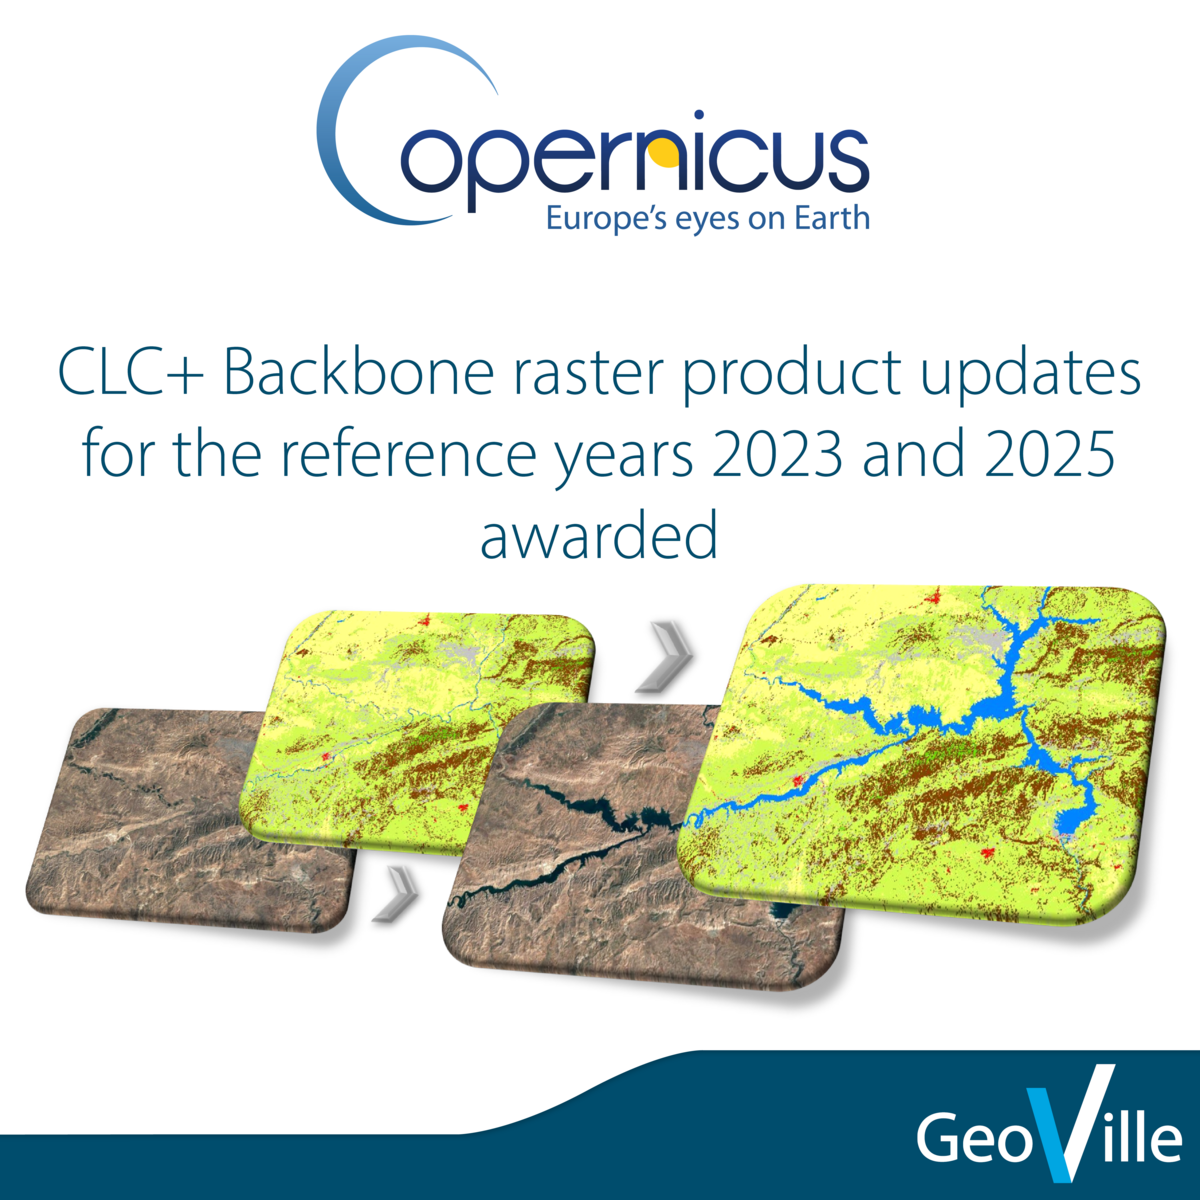 CLC+ Backbone raster product updates for the reference years 2023 and 2025 awarded